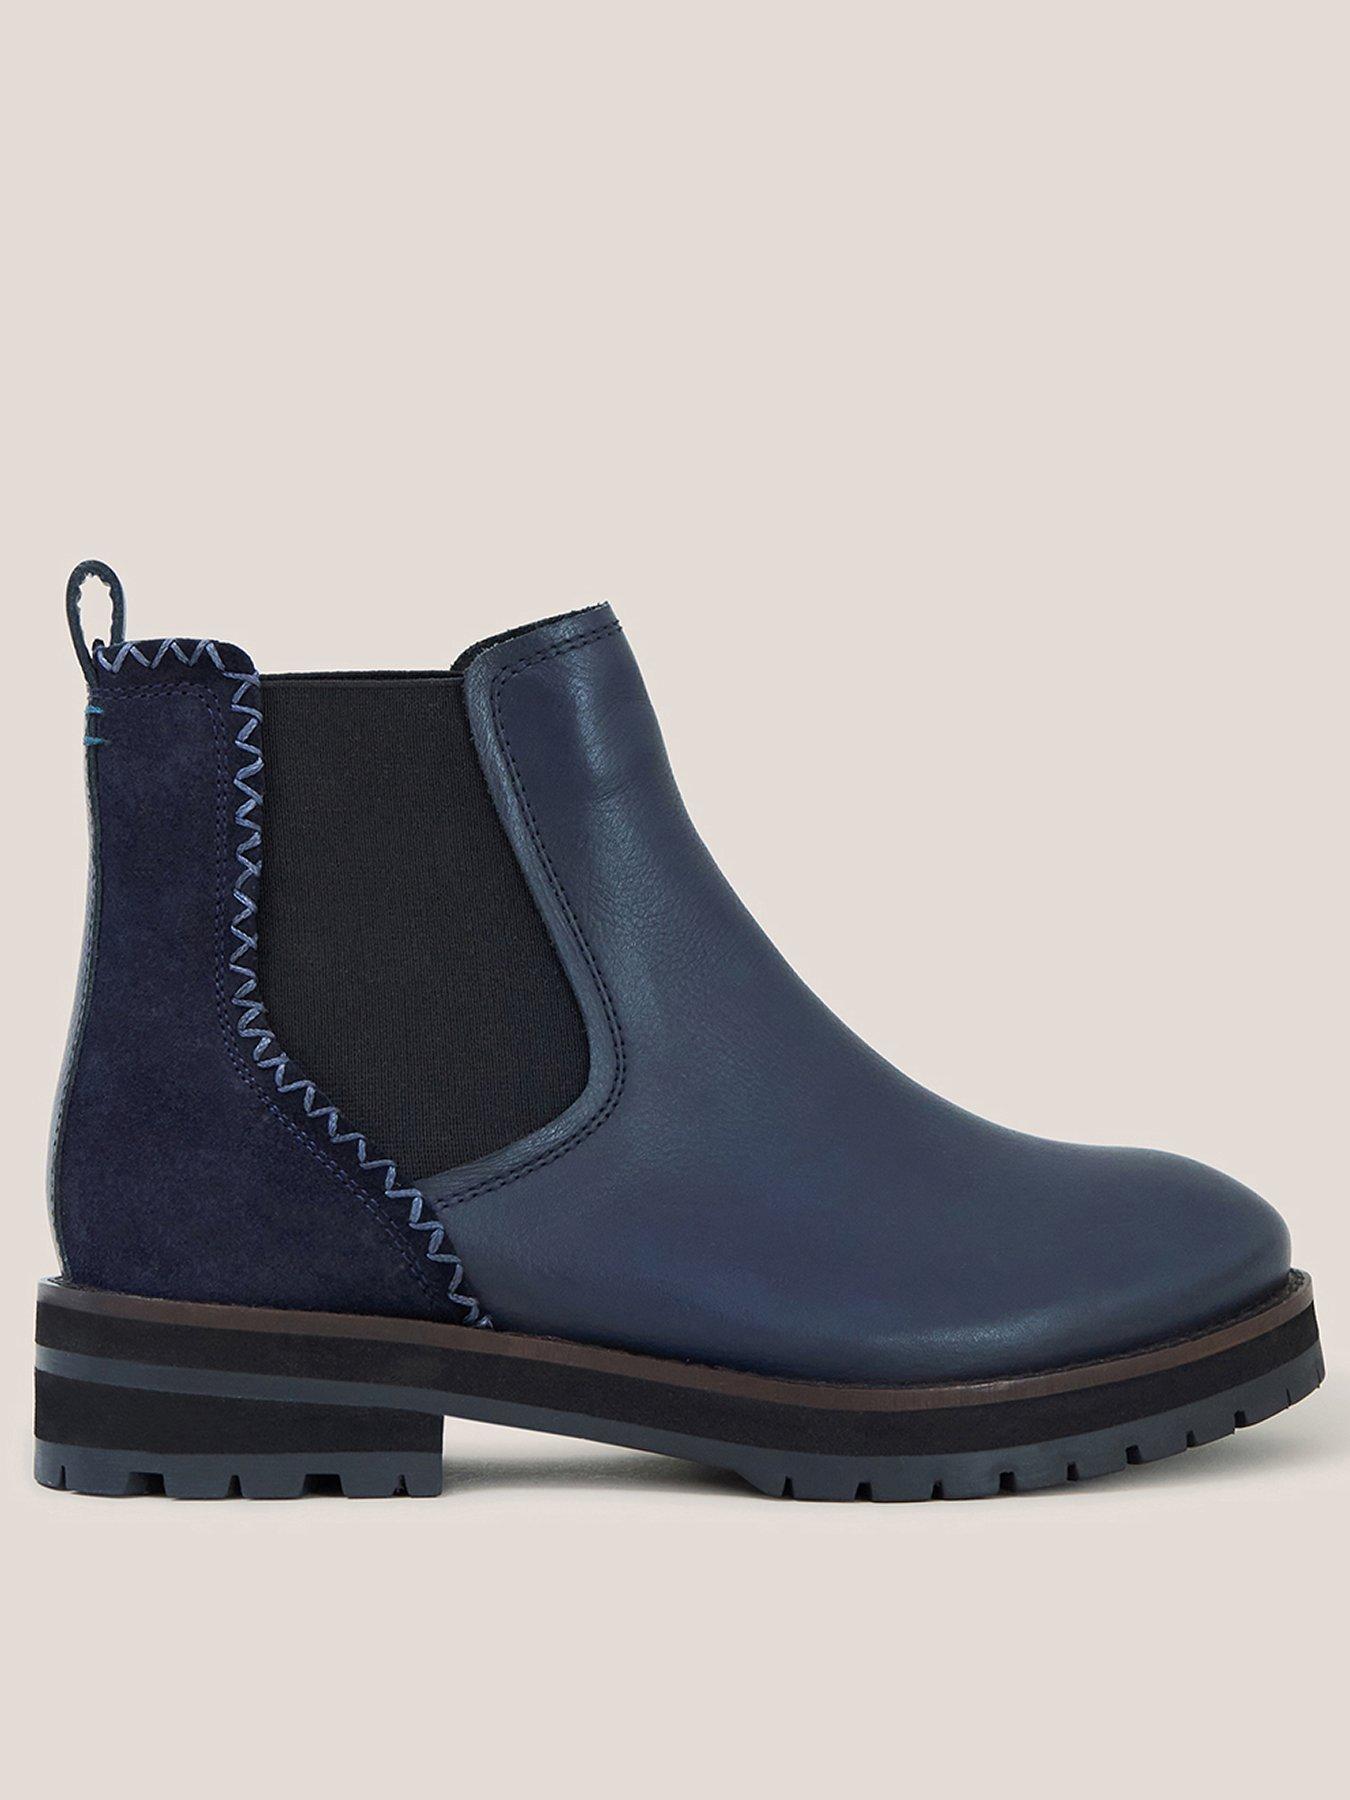 Women's Boots | Ladies Winter Boots Collection | Very Ireland